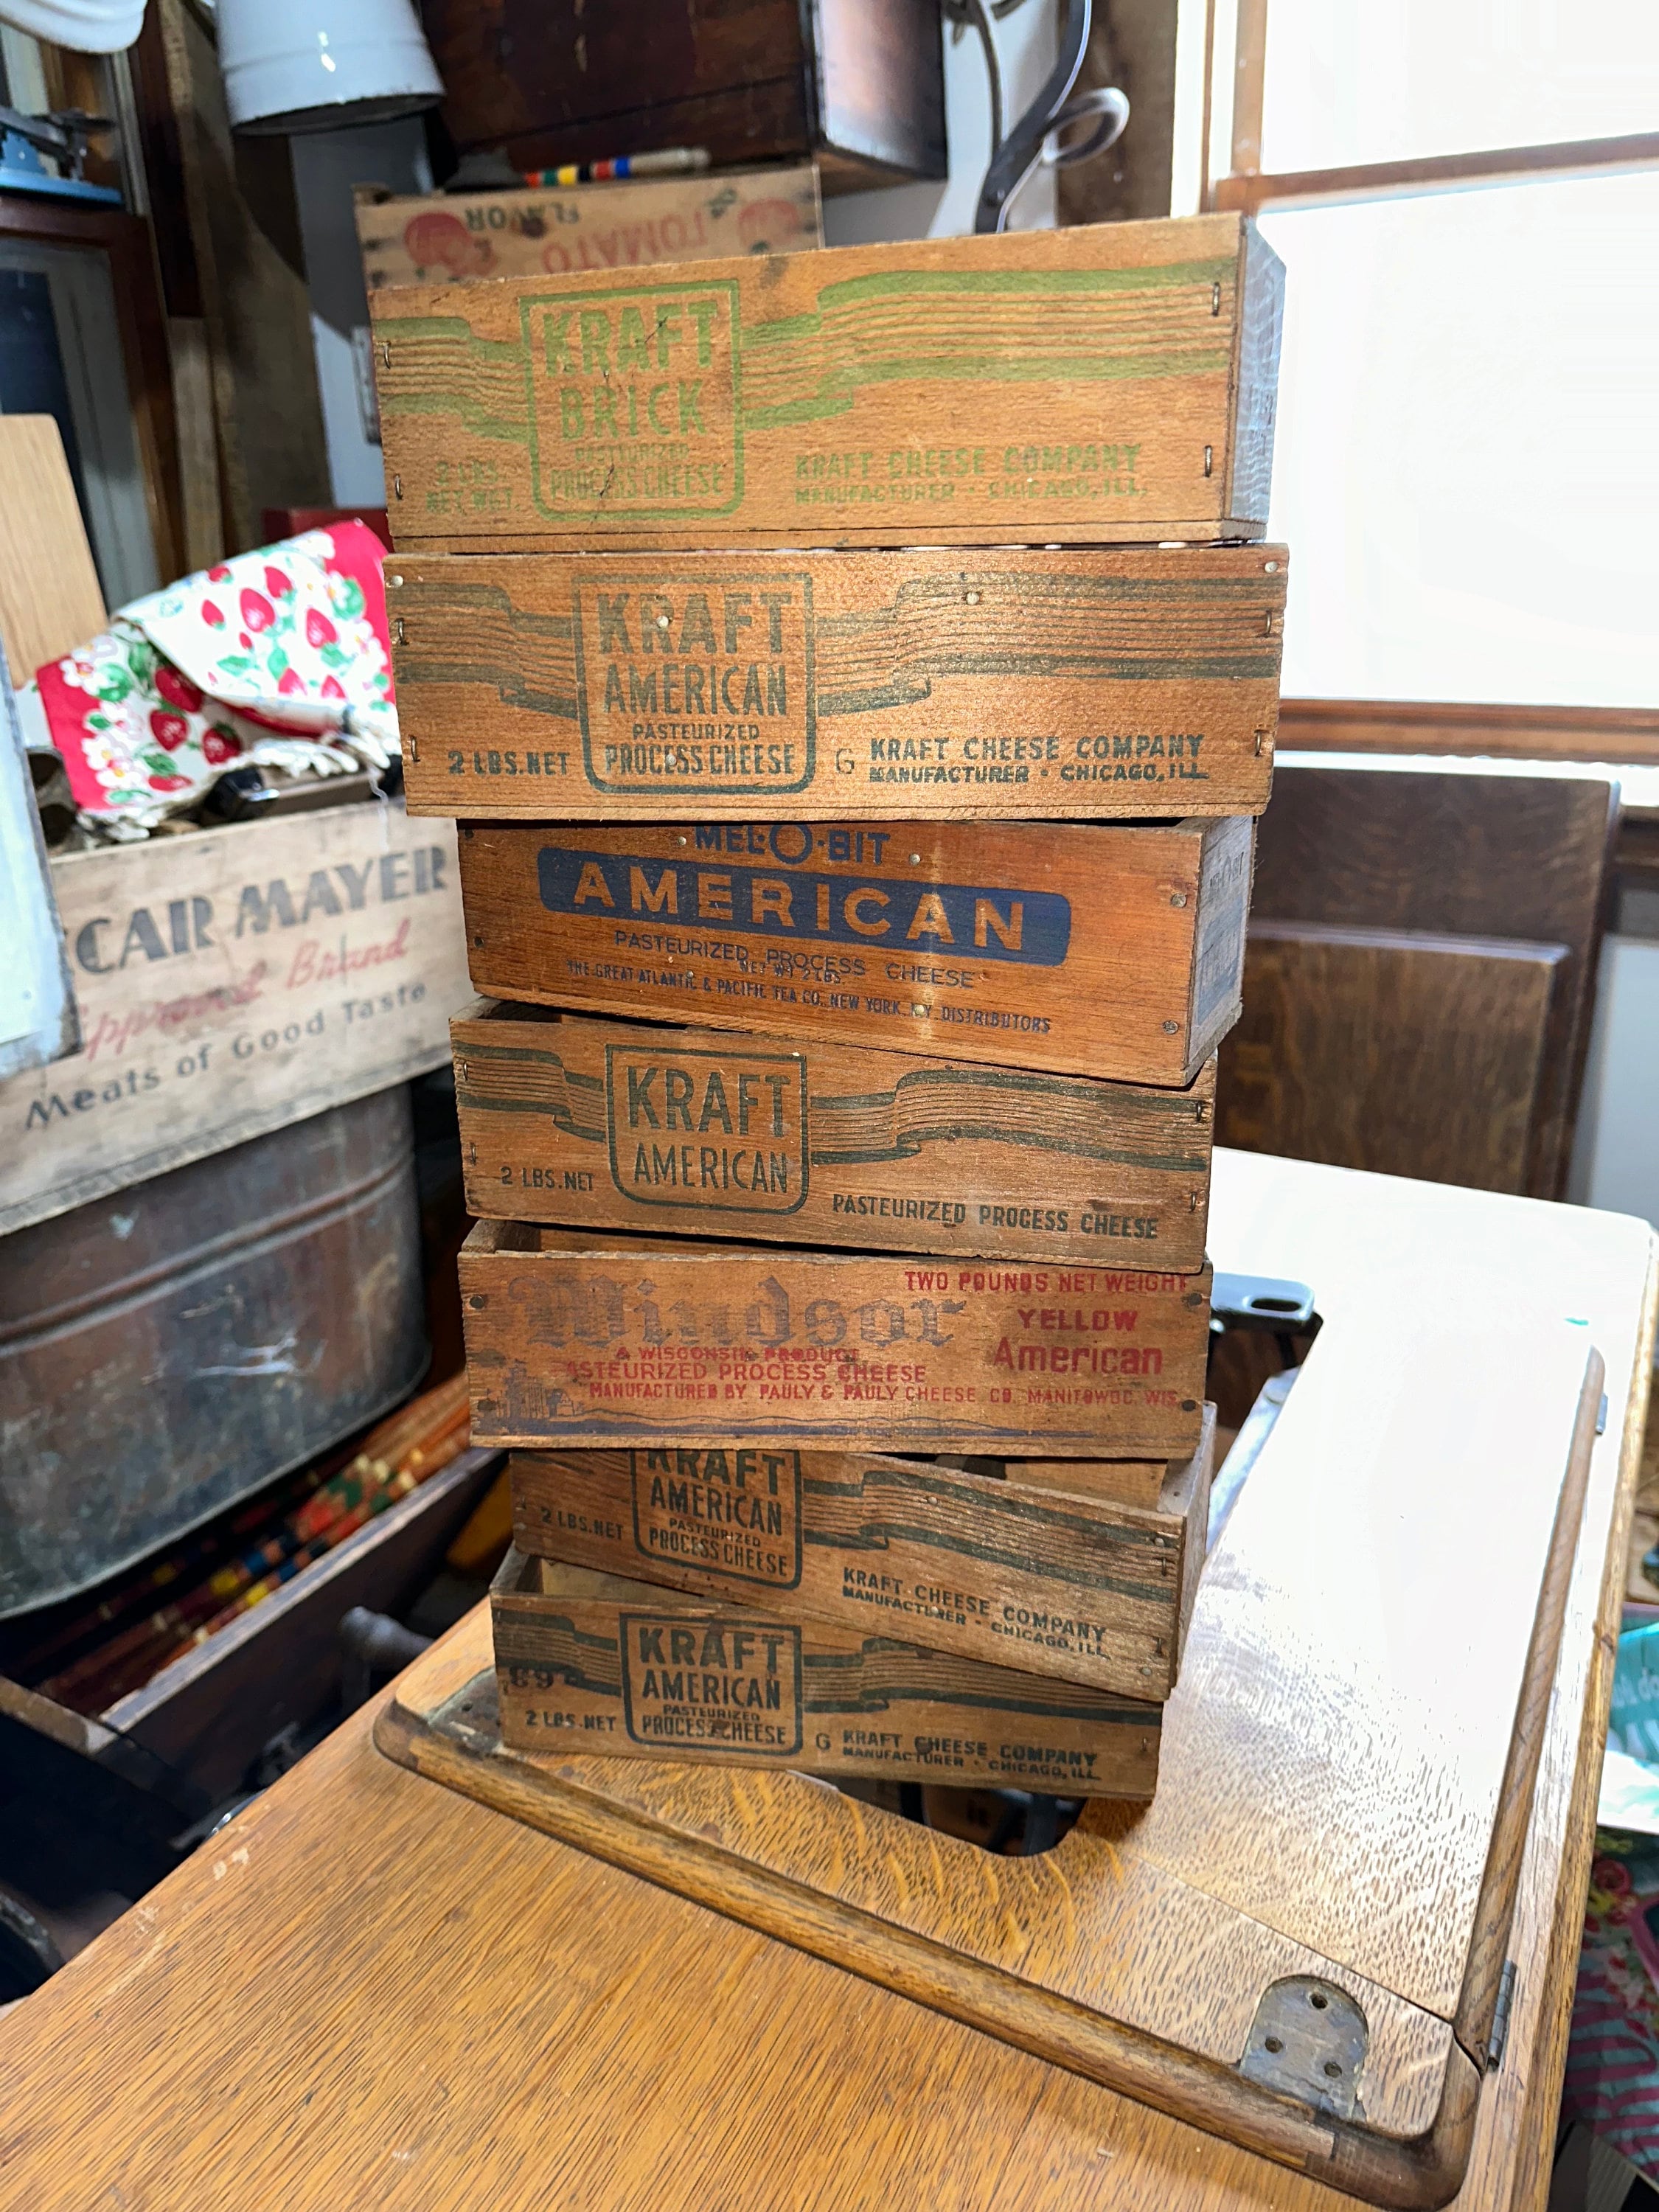 Authentic Antique American Country Store Wooden Shipping & Display Soap Box  With Whimsical Mottos